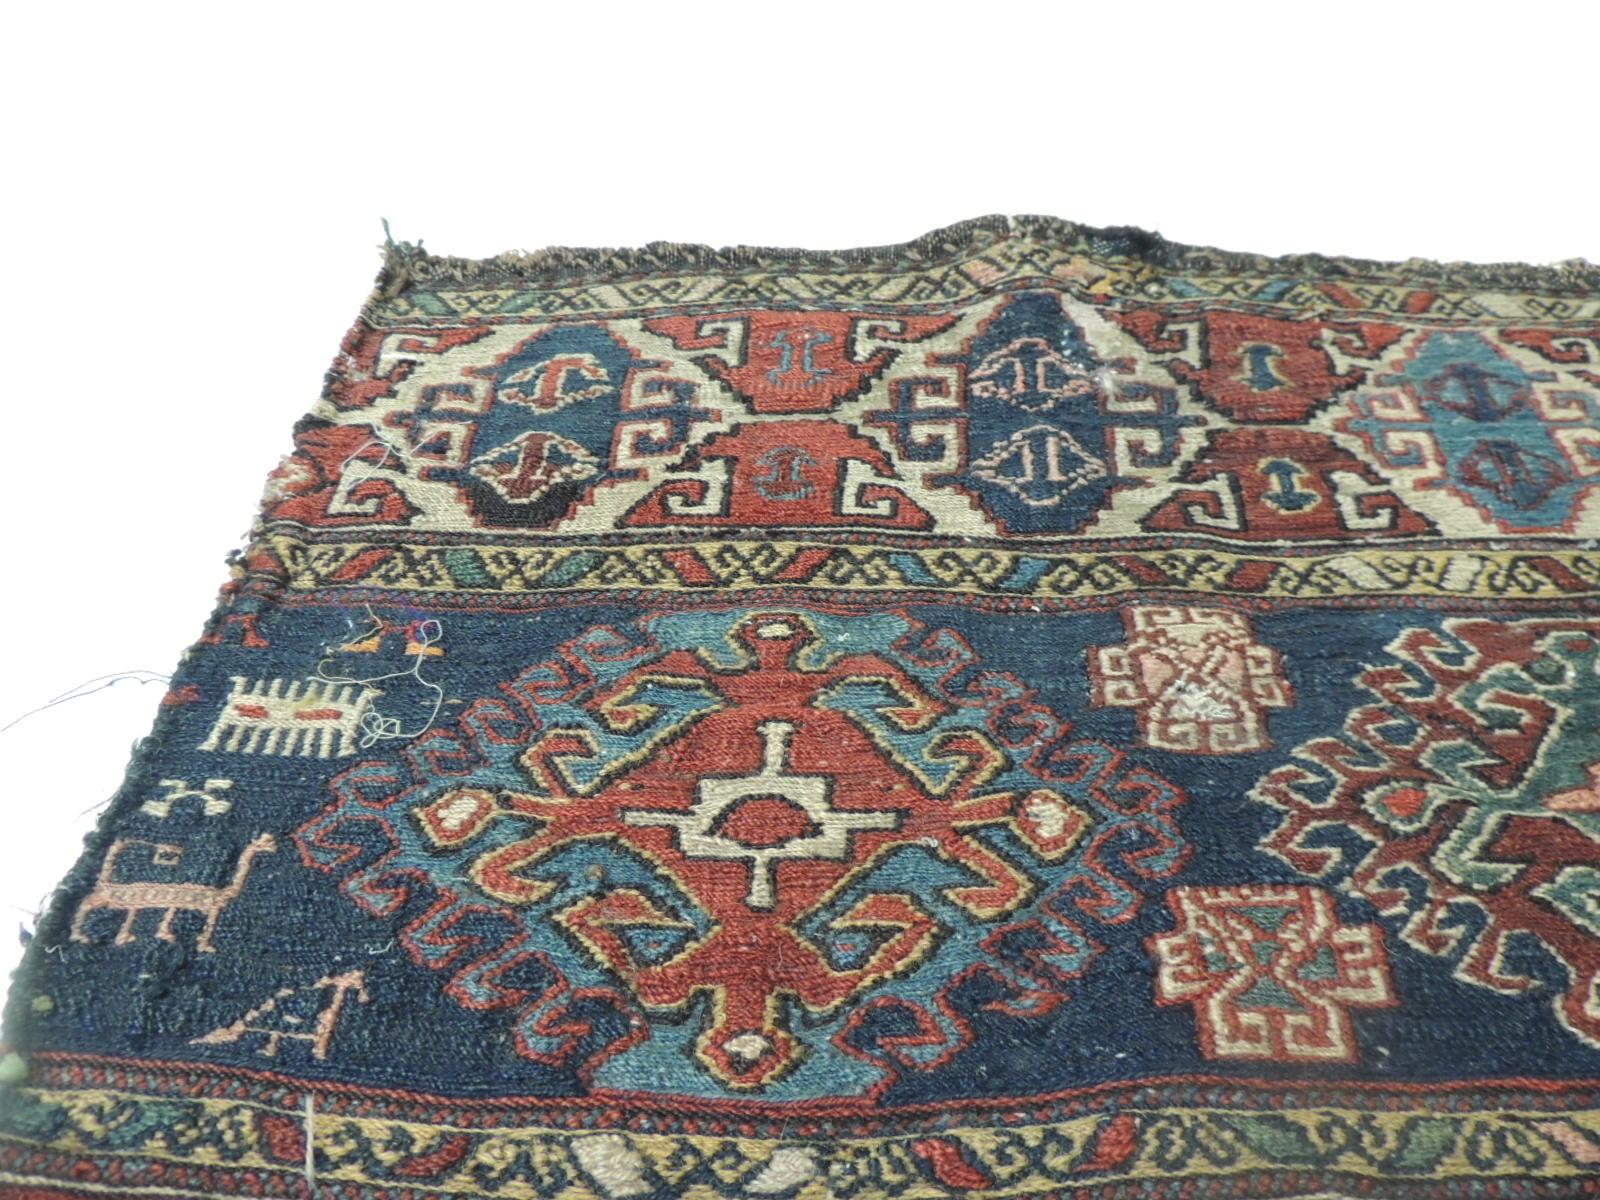 Vintage tribal design Kilim Rug - Grain Sack fragment
Vintage Shahsavan fragment of a Kilim rug in the front, and traditional Anatolian kilims all around. This piece is a Soumak which is a term used for weft wrapping weaving technique and it is